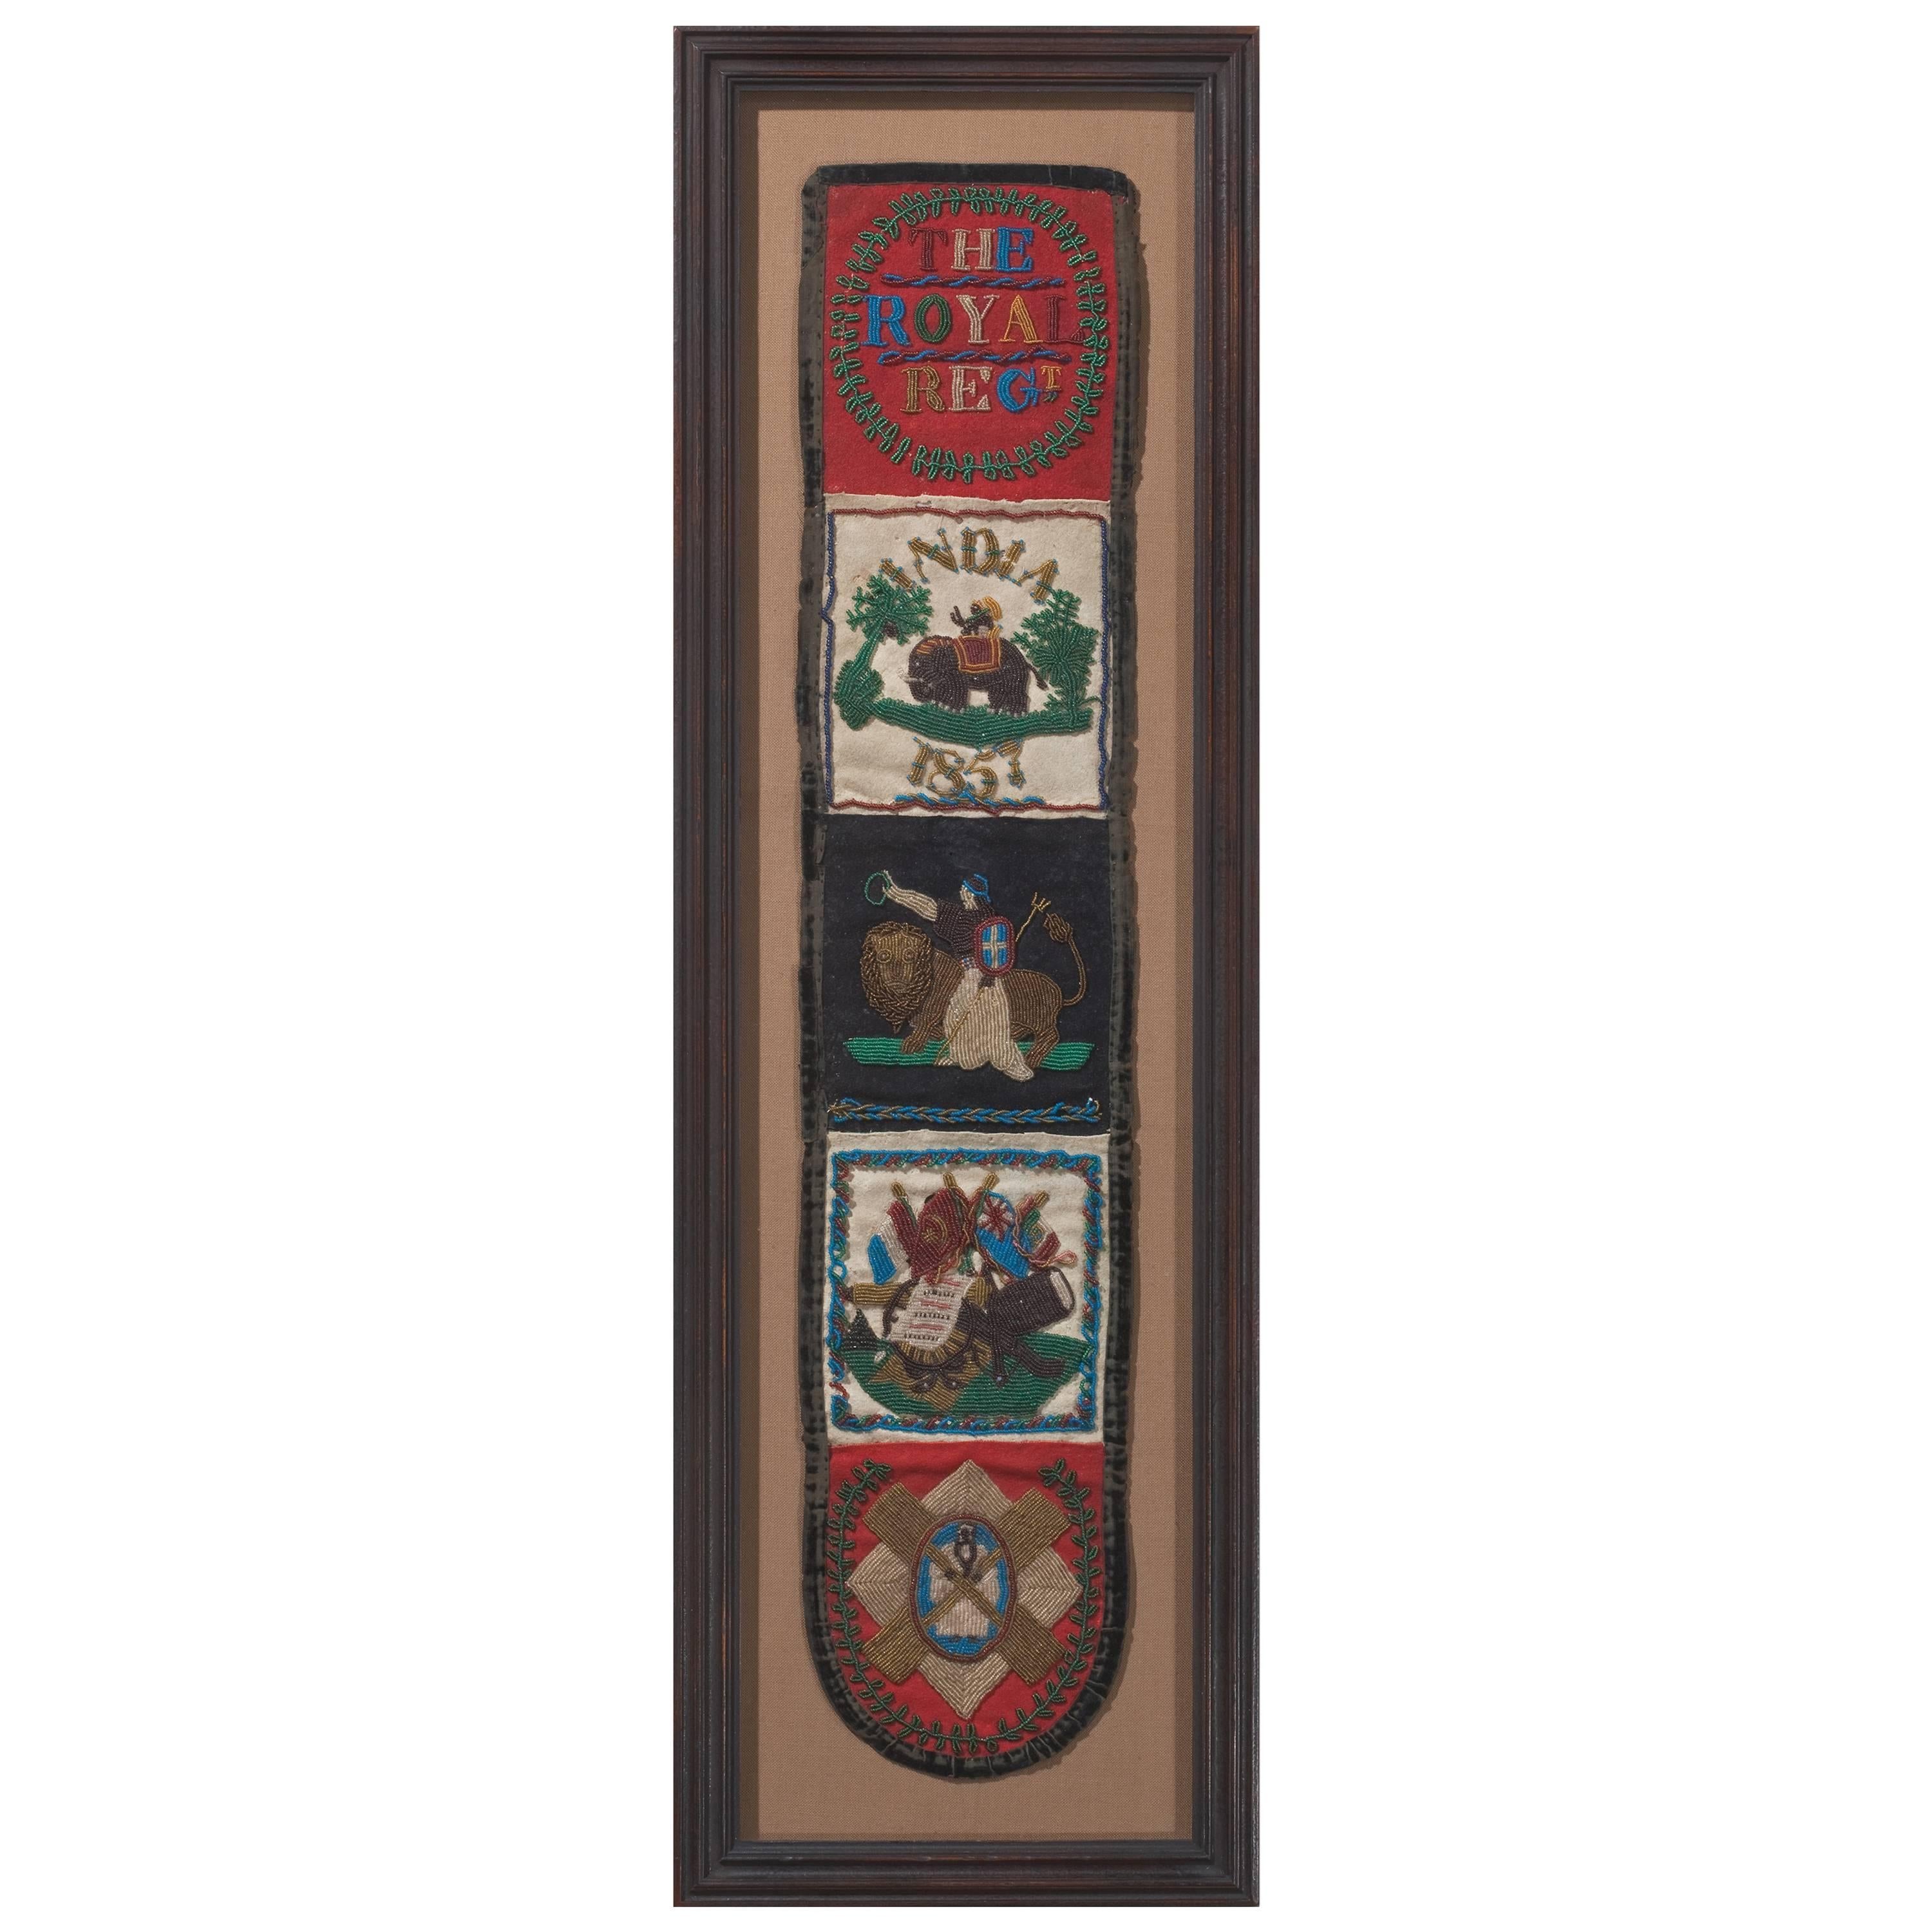 Framed 1857 Beadwork from the Royal Regiment of India